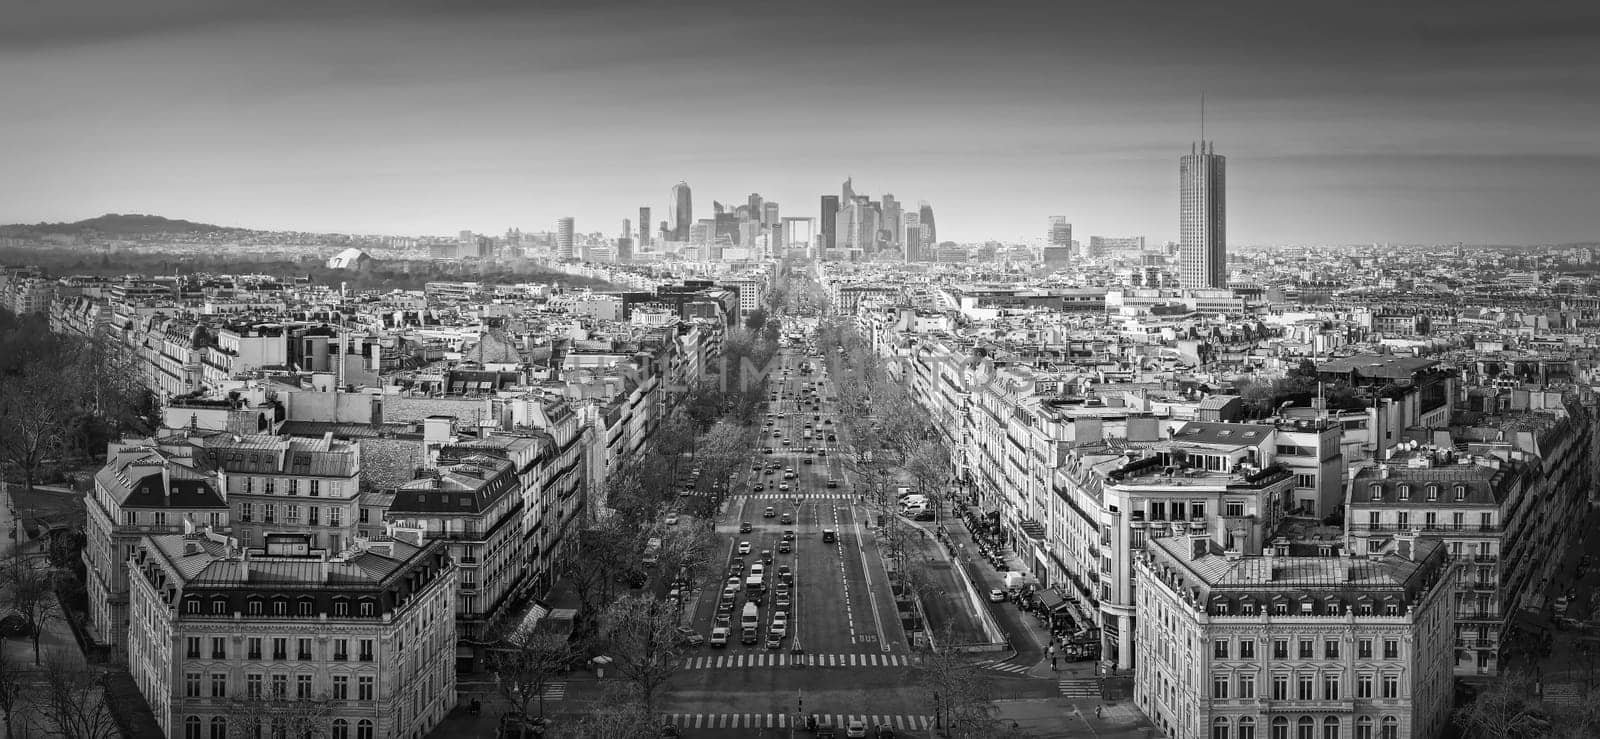 Black and white Paris cityscape panorama with view to La Defense metropolitan district, France. Champs-Elysee avenue, beautiful parisian architecture, historic buildings and landmarks on the horizon